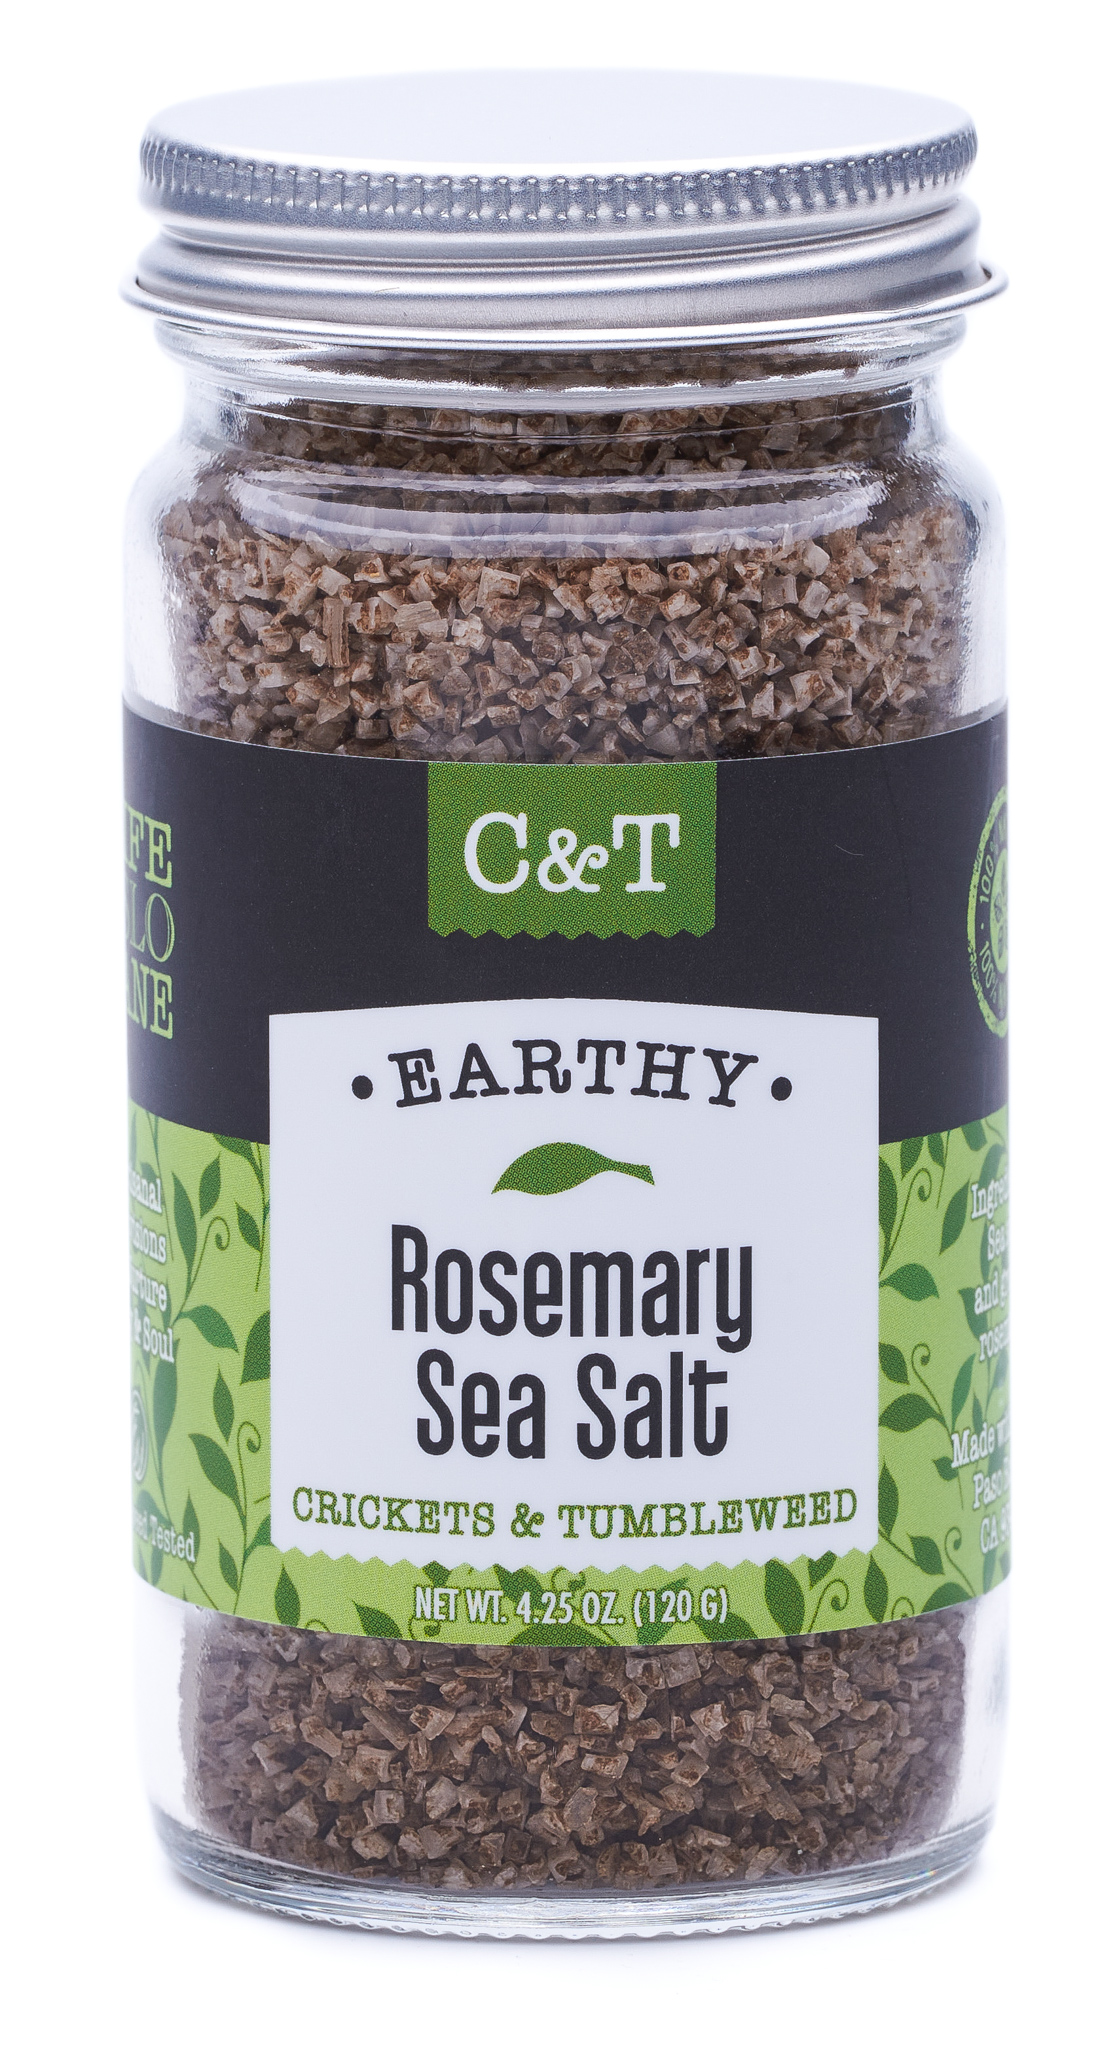 Product Image for C&T Sea Salt Rosemary